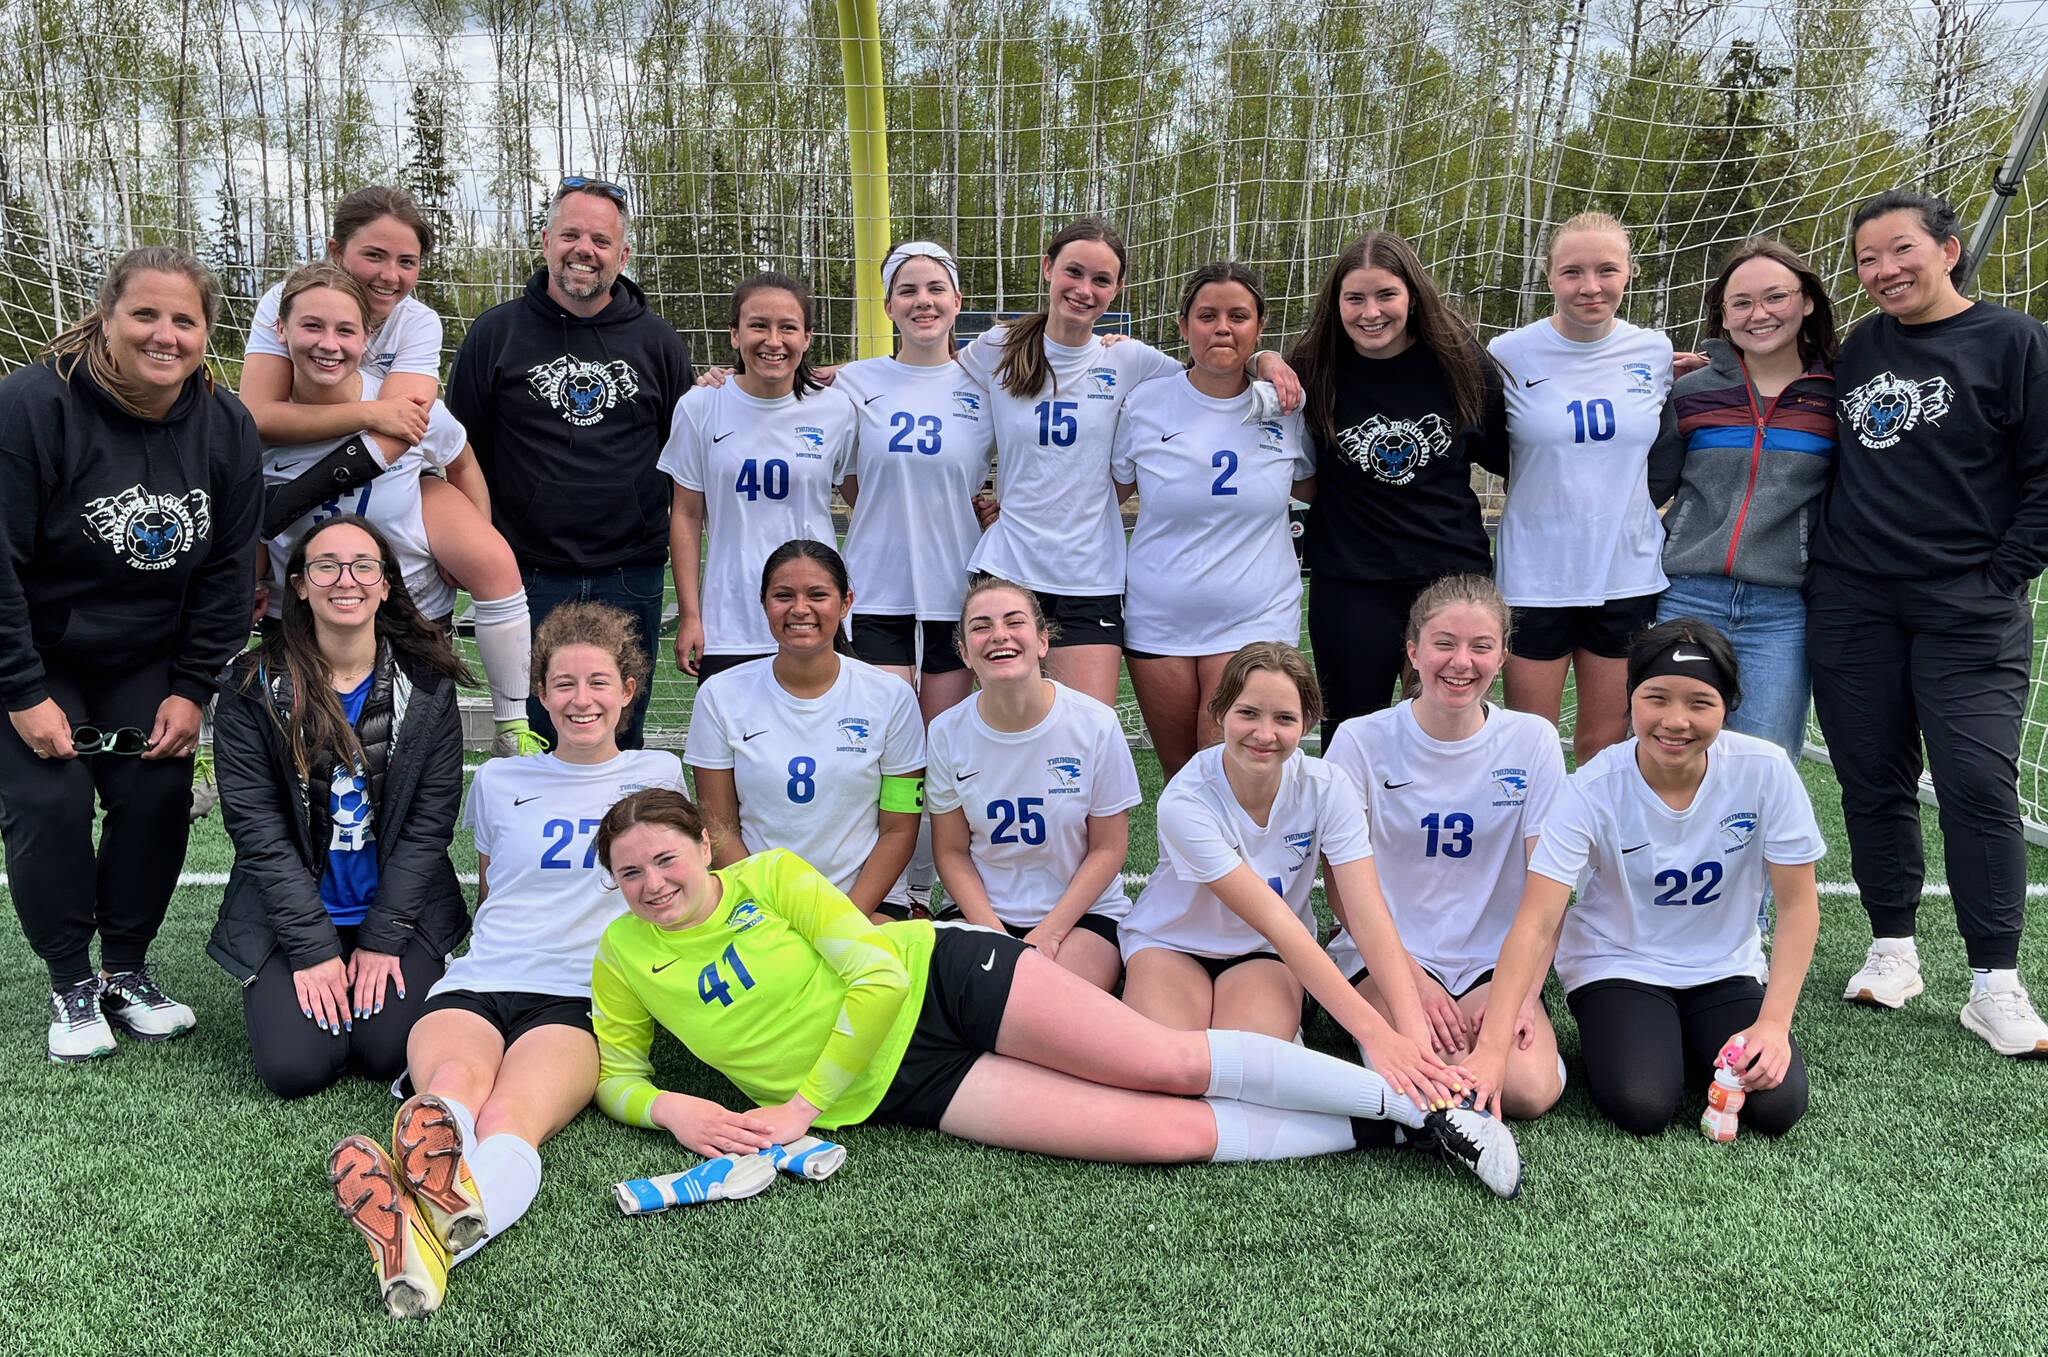 The Thunder Mountain High School Lady Falcons soccer team pose for a photo at Redington High School in Wasilla. The Lady Falcons defeated the Huskies 8-0 for their final game of the season. (Courtesy Photo)